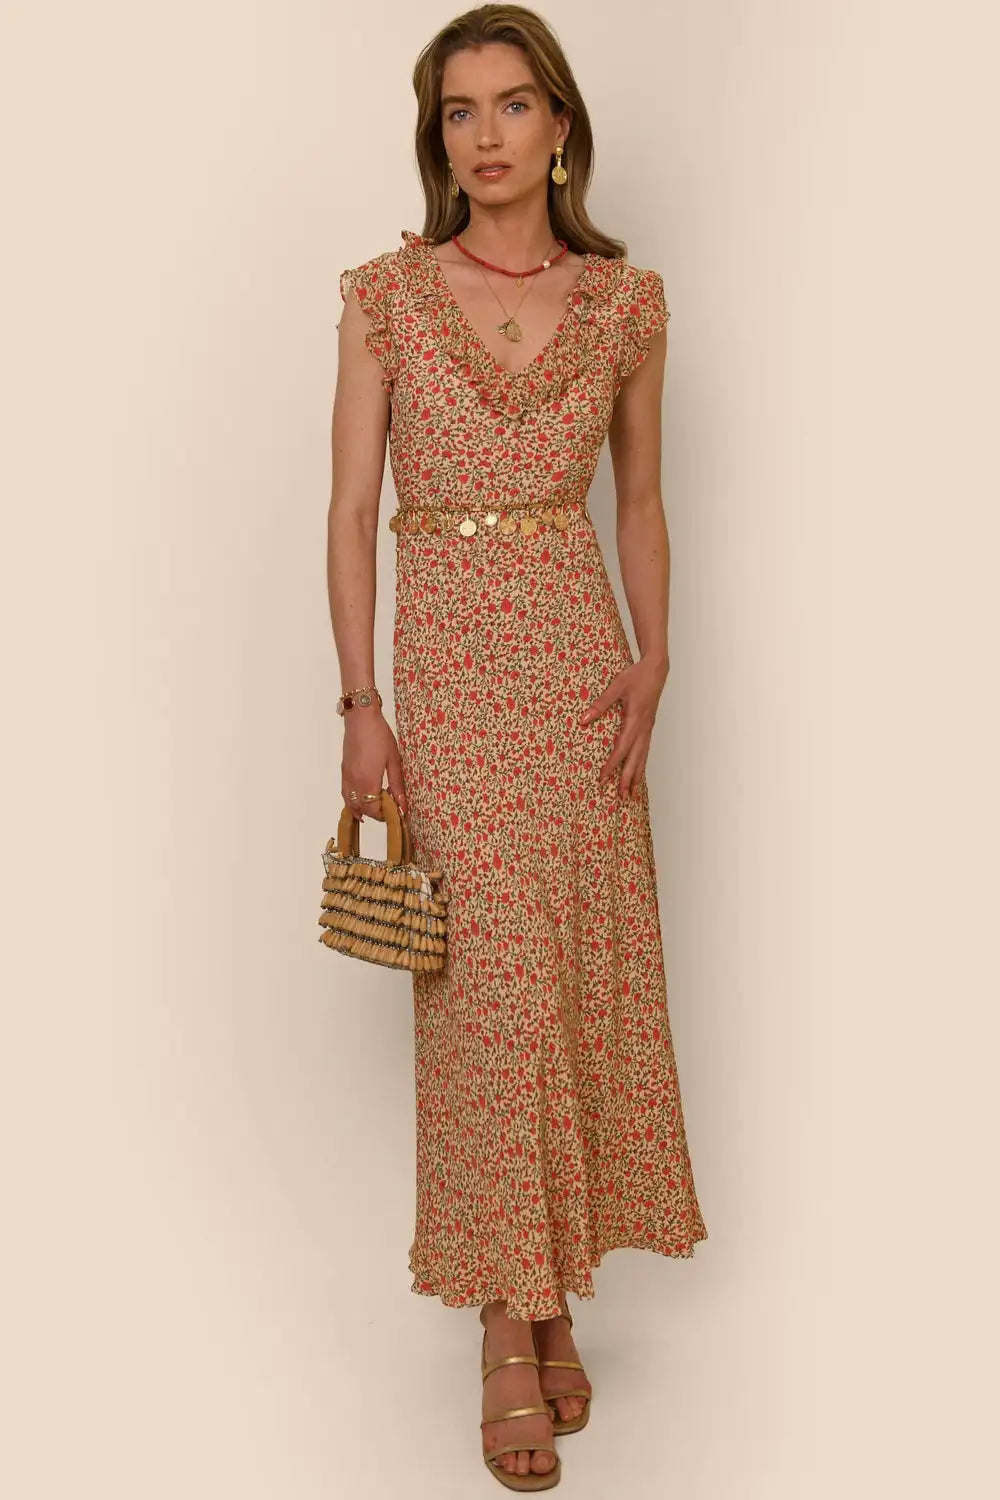 Indulge in the elegance of the Ditsy Cream Dress by RIXO. This high-quality, designer handmade dress features a ditsy cream print and a long, flowing skirt for a chic and sophisticated look. Every thread has been carefully crafted to ensure the utmost quality, making this dress a must-have for any fashion-forward individual.